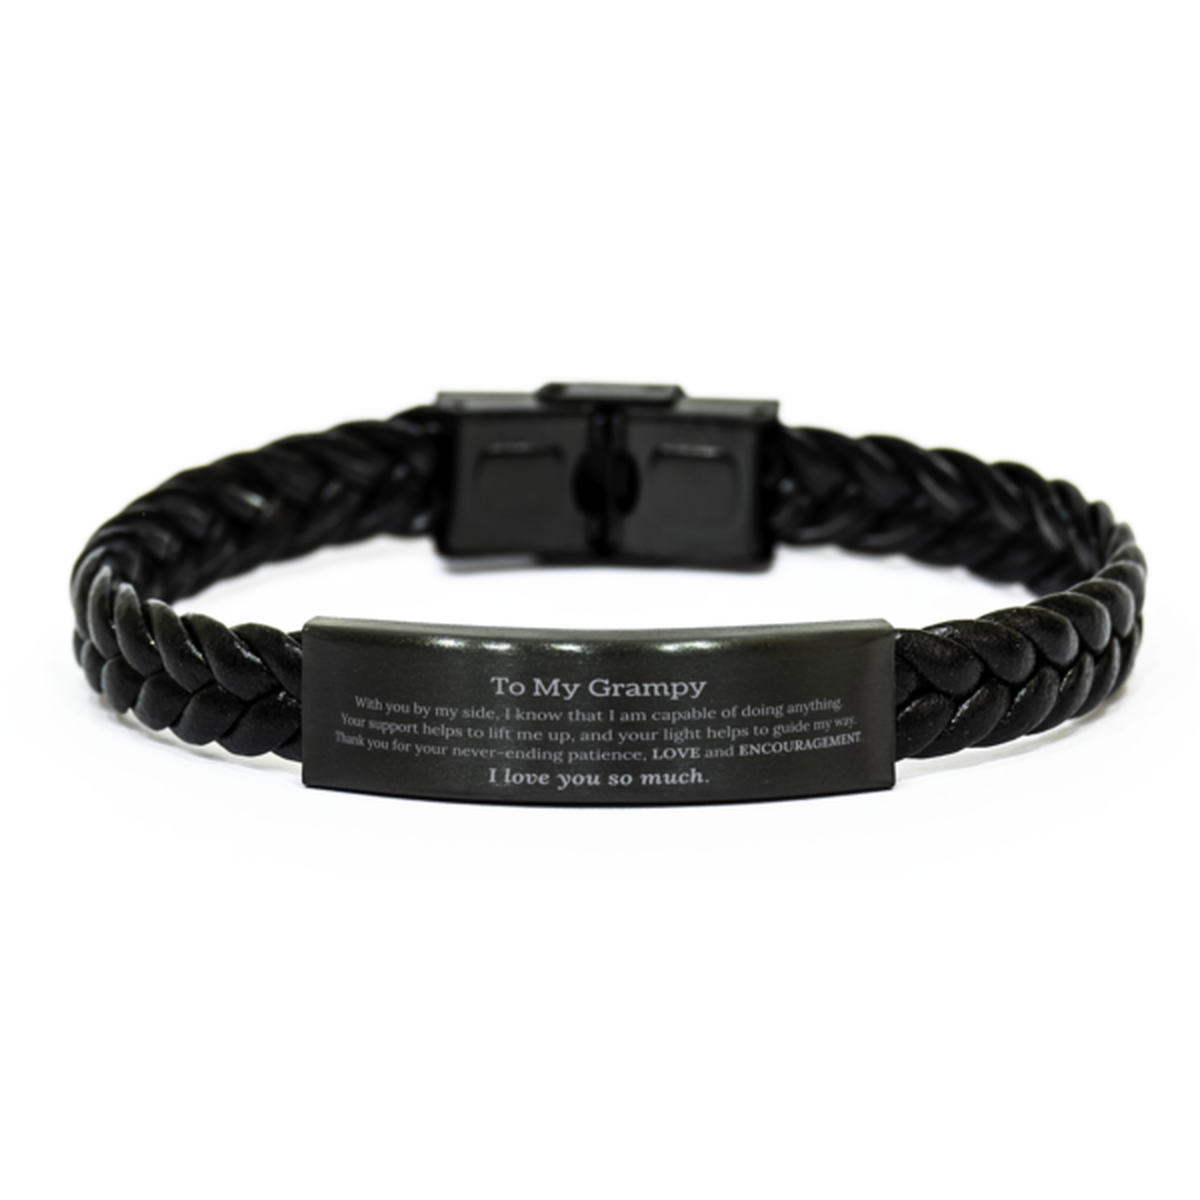 Appreciation Grampy Braided Leather Bracelet Gifts, To My Grampy Birthday Christmas Wedding Keepsake Gifts for Grampy With you by my side, I know that I am capable of doing anything. I love you so much